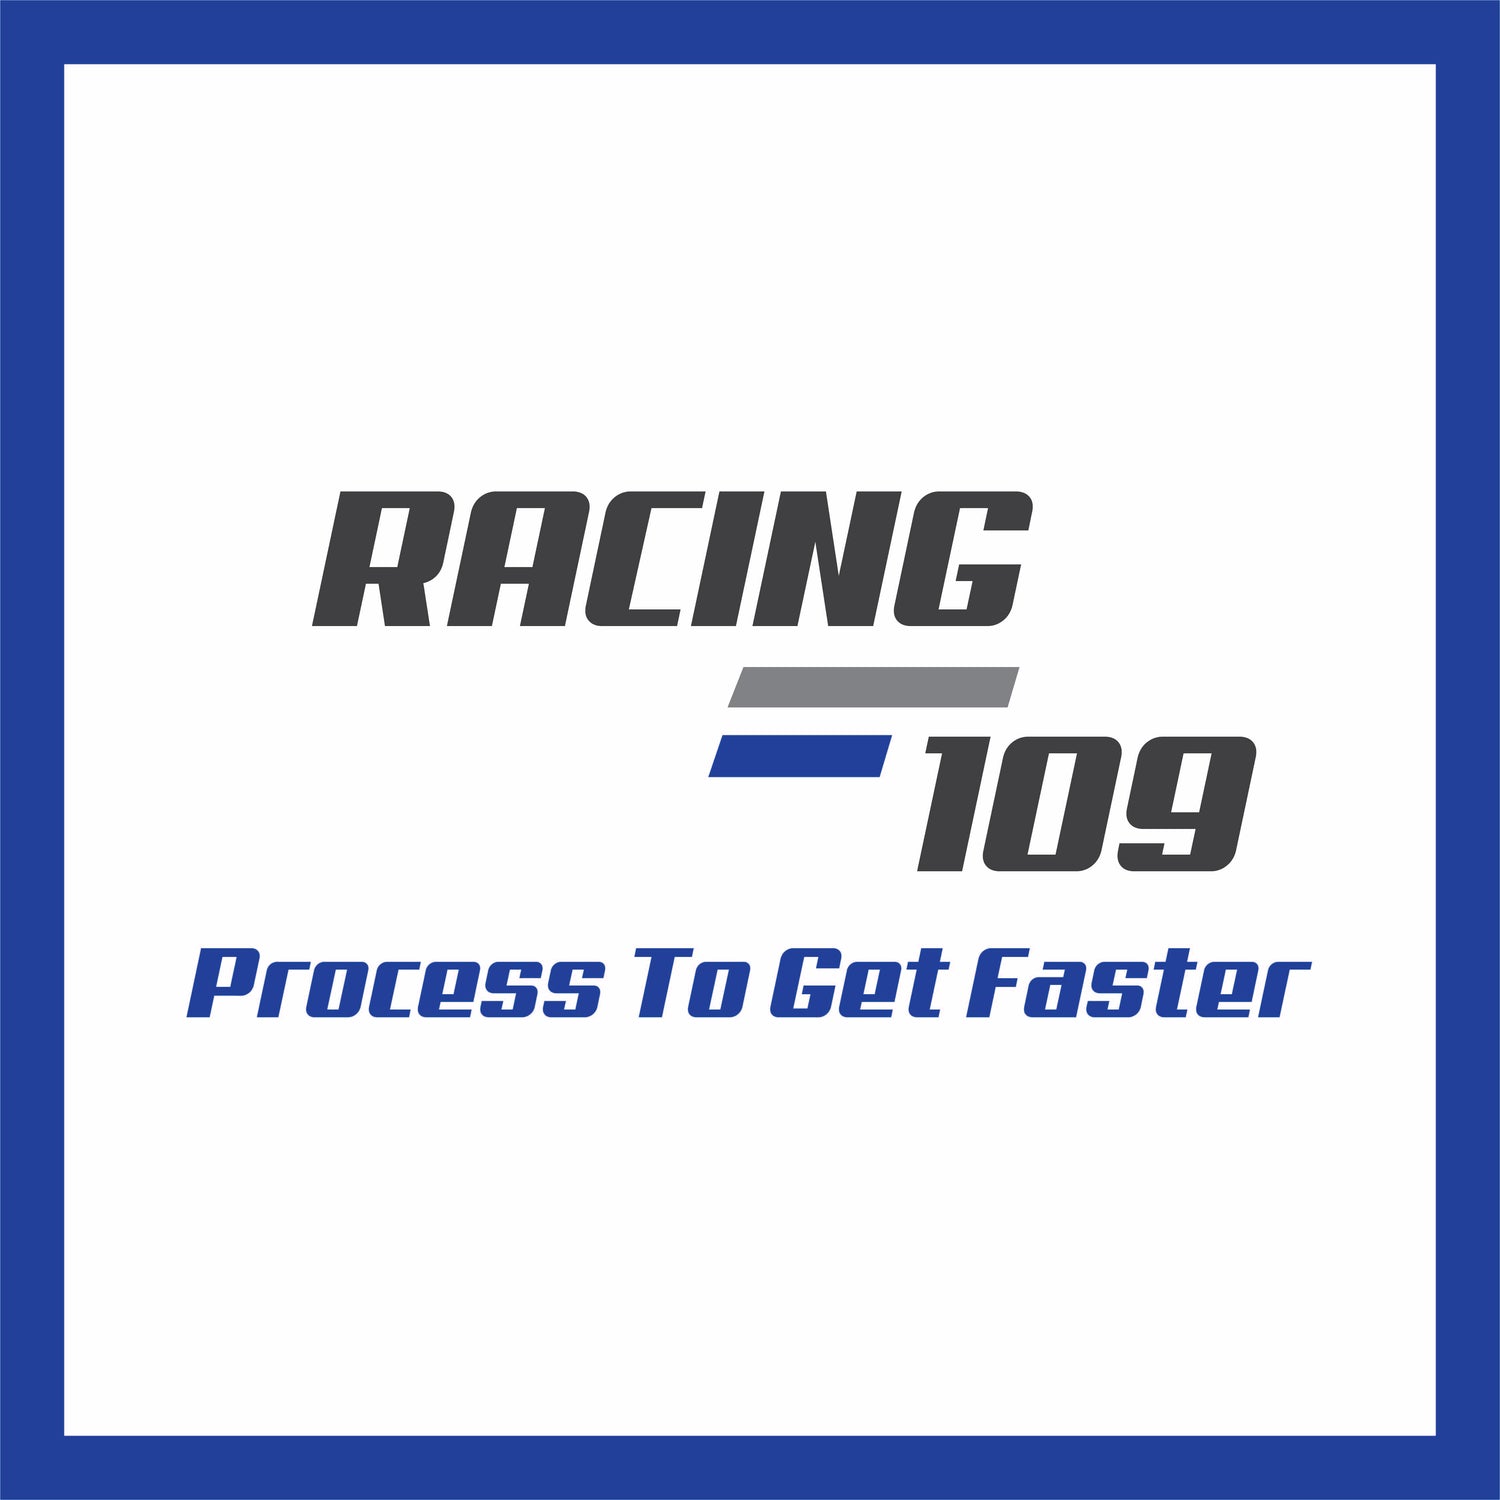 Racing 109 - The Process To Get Faster